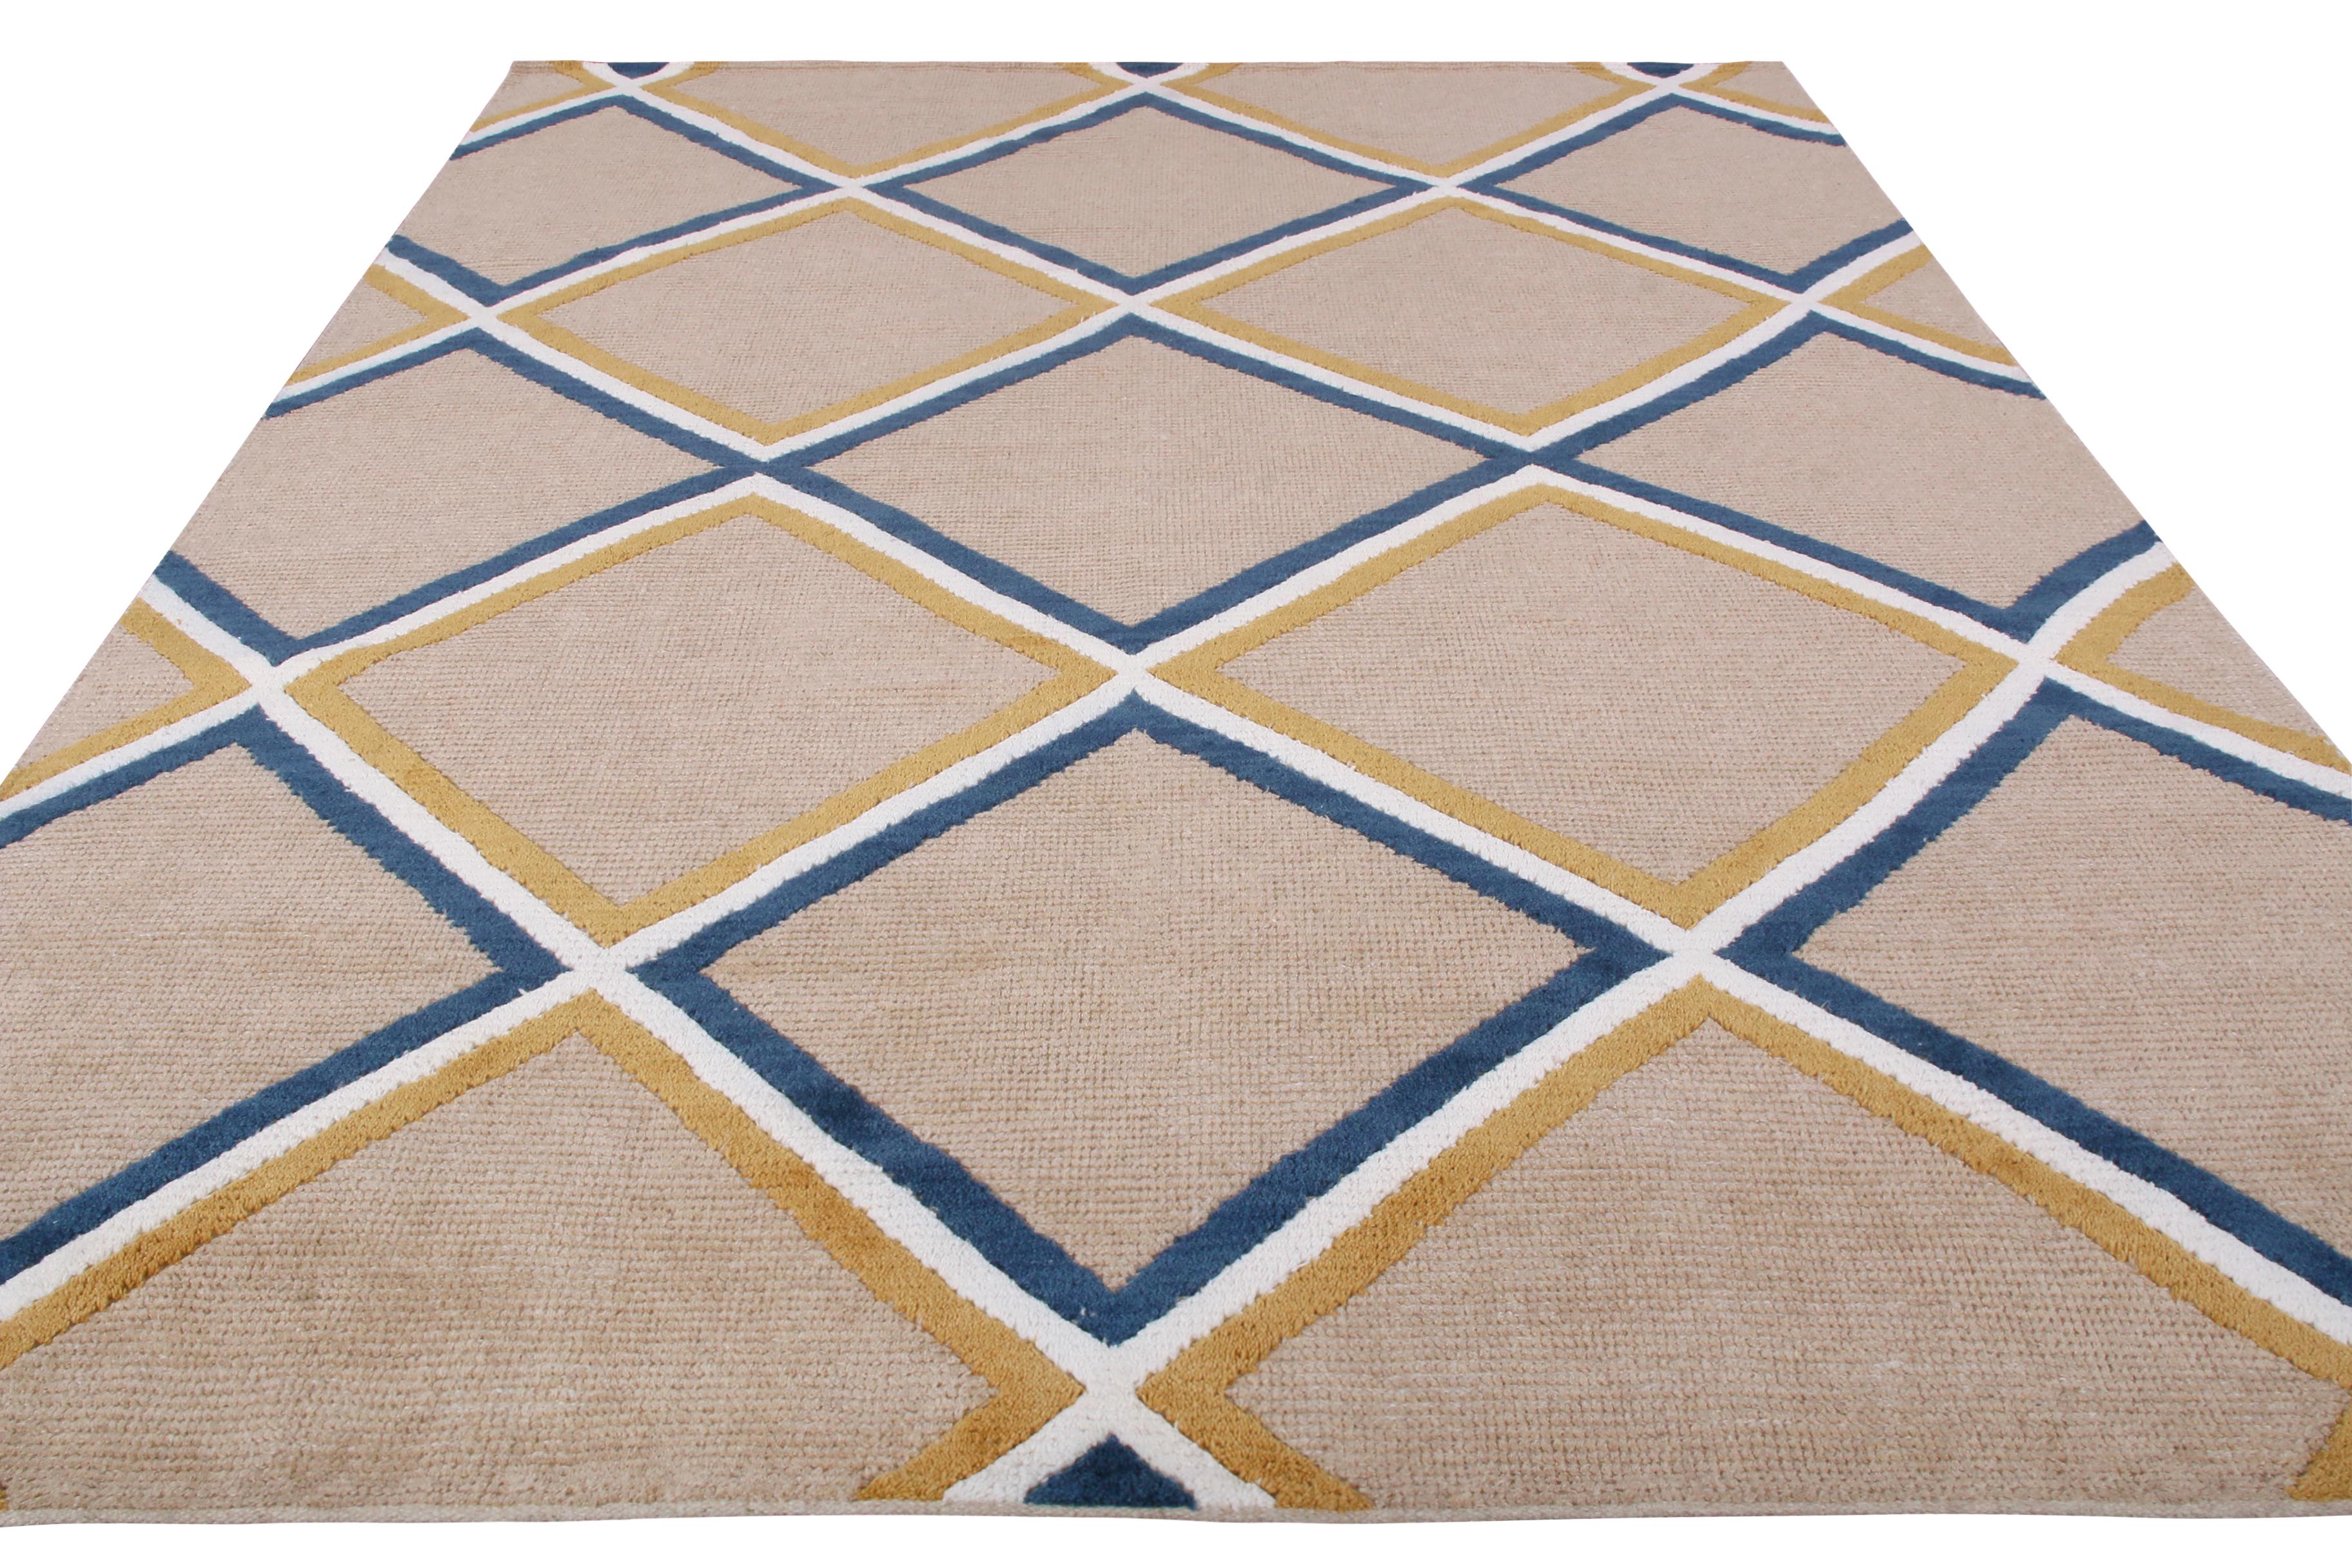 This contemporary diamond pattern rug represents the latest additions to Rug & Kilim’s New and Modern Collections, enjoying an idyllic marriage of reserved, soothing depth and grace in the transitional play of blue and gold over beige; hand knotted